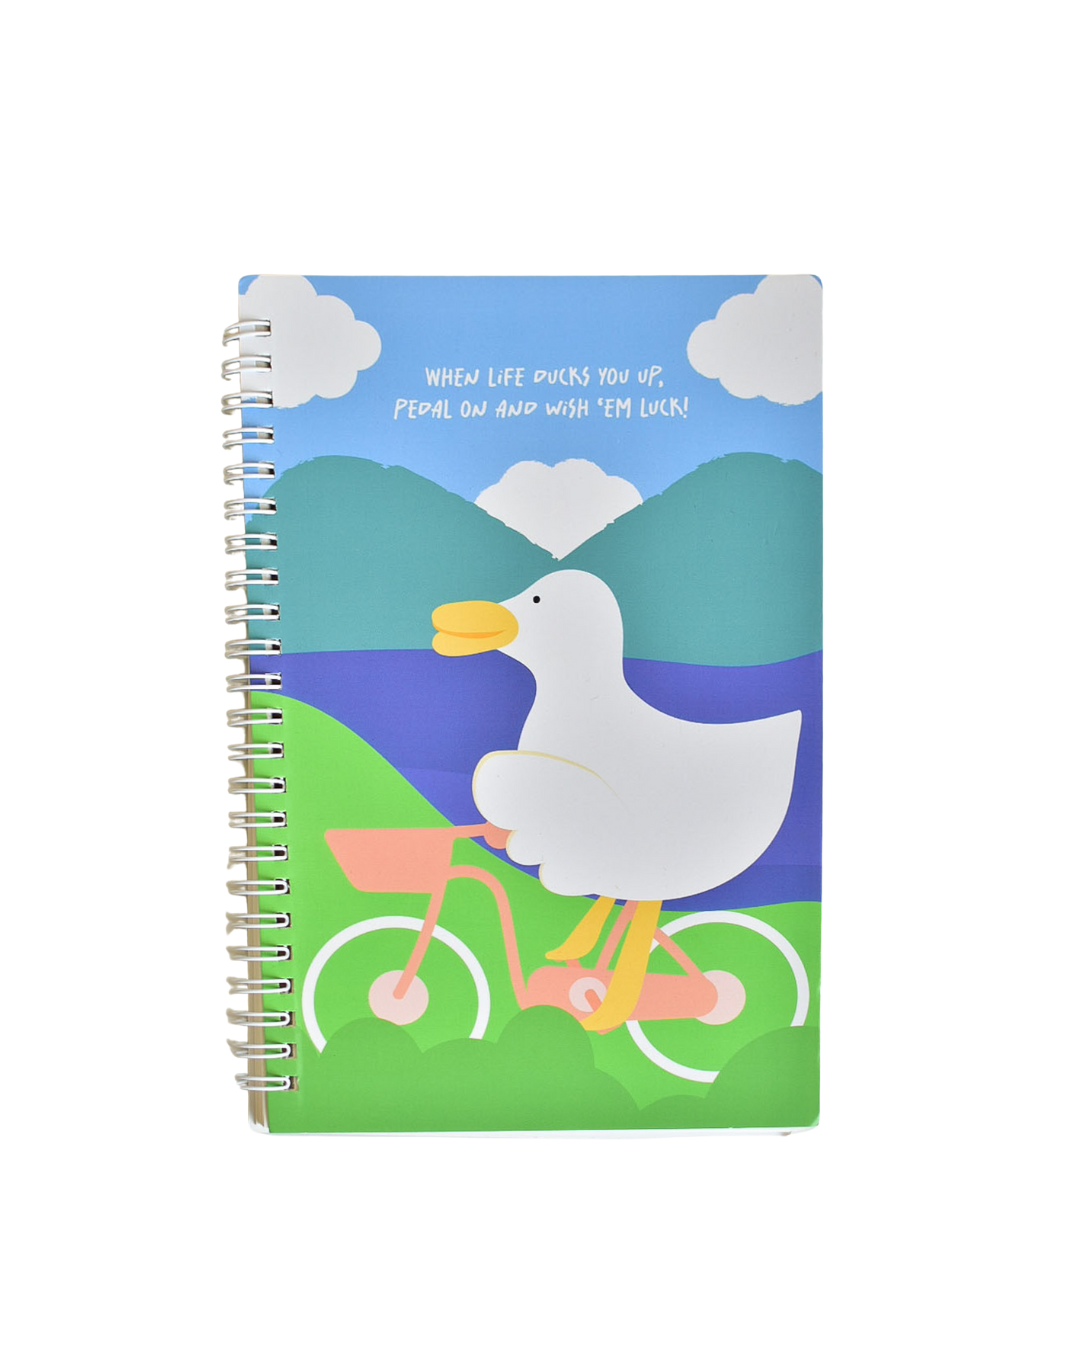 Pedal On Spiral Notebook